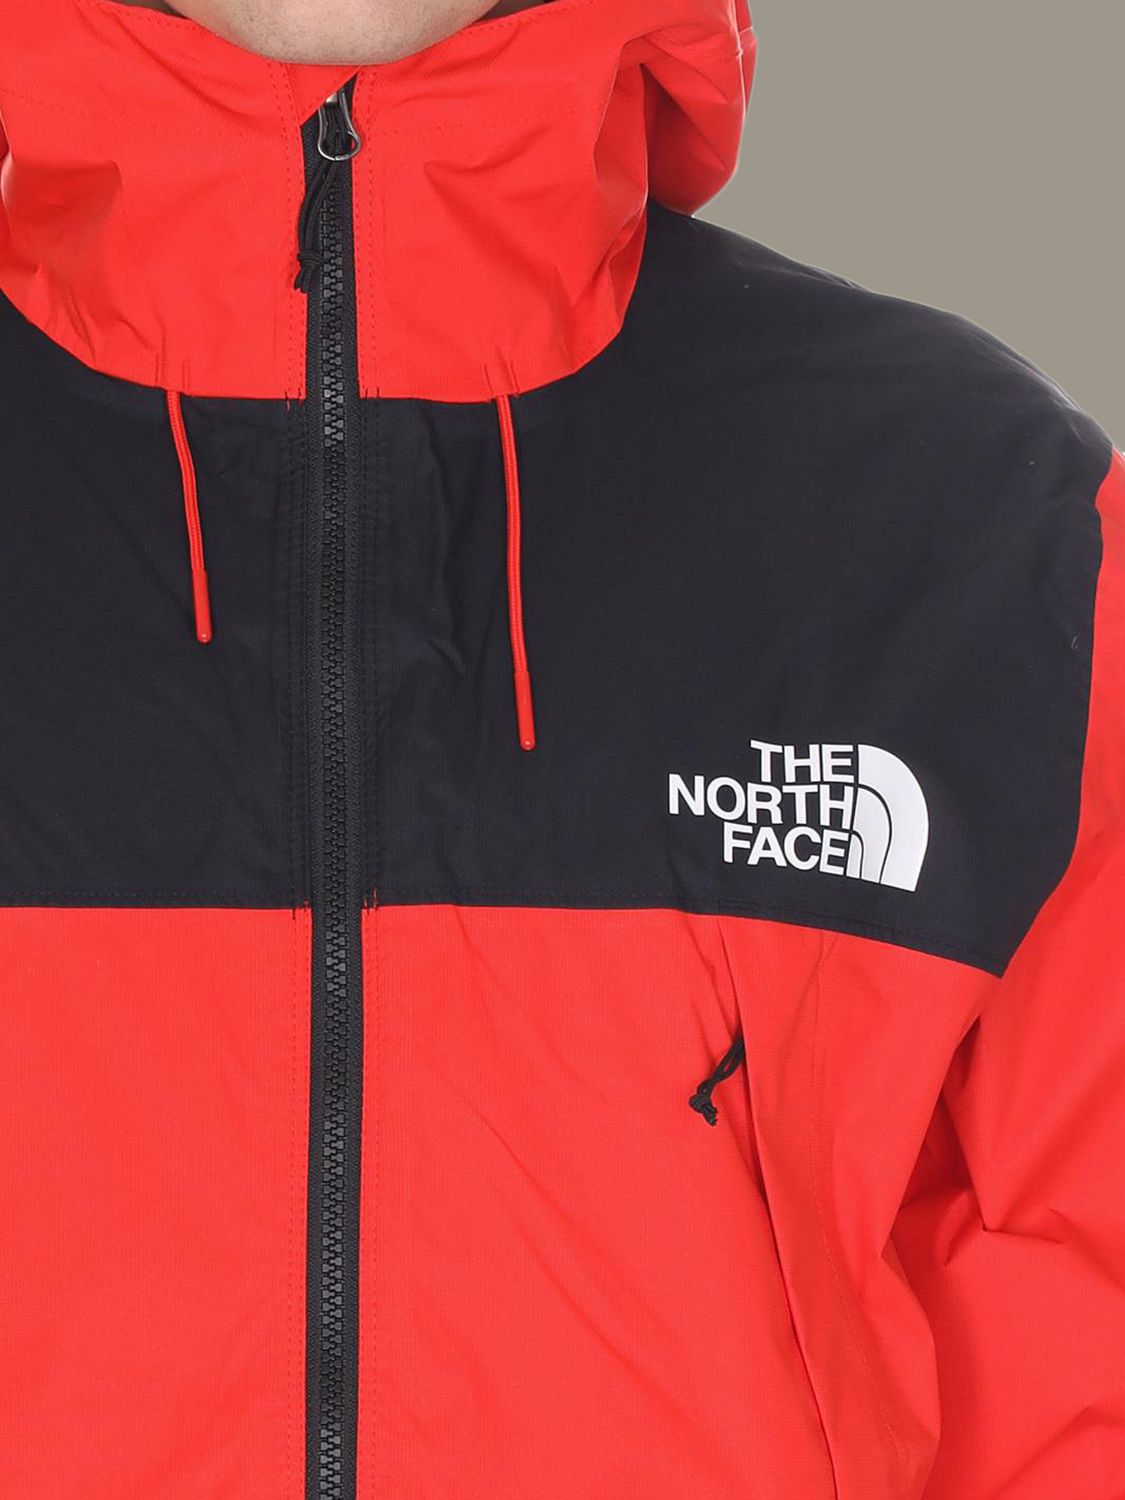 THE NORTH FACE: Jacket men | Jacket The North Face Men Red | Jacket The ...